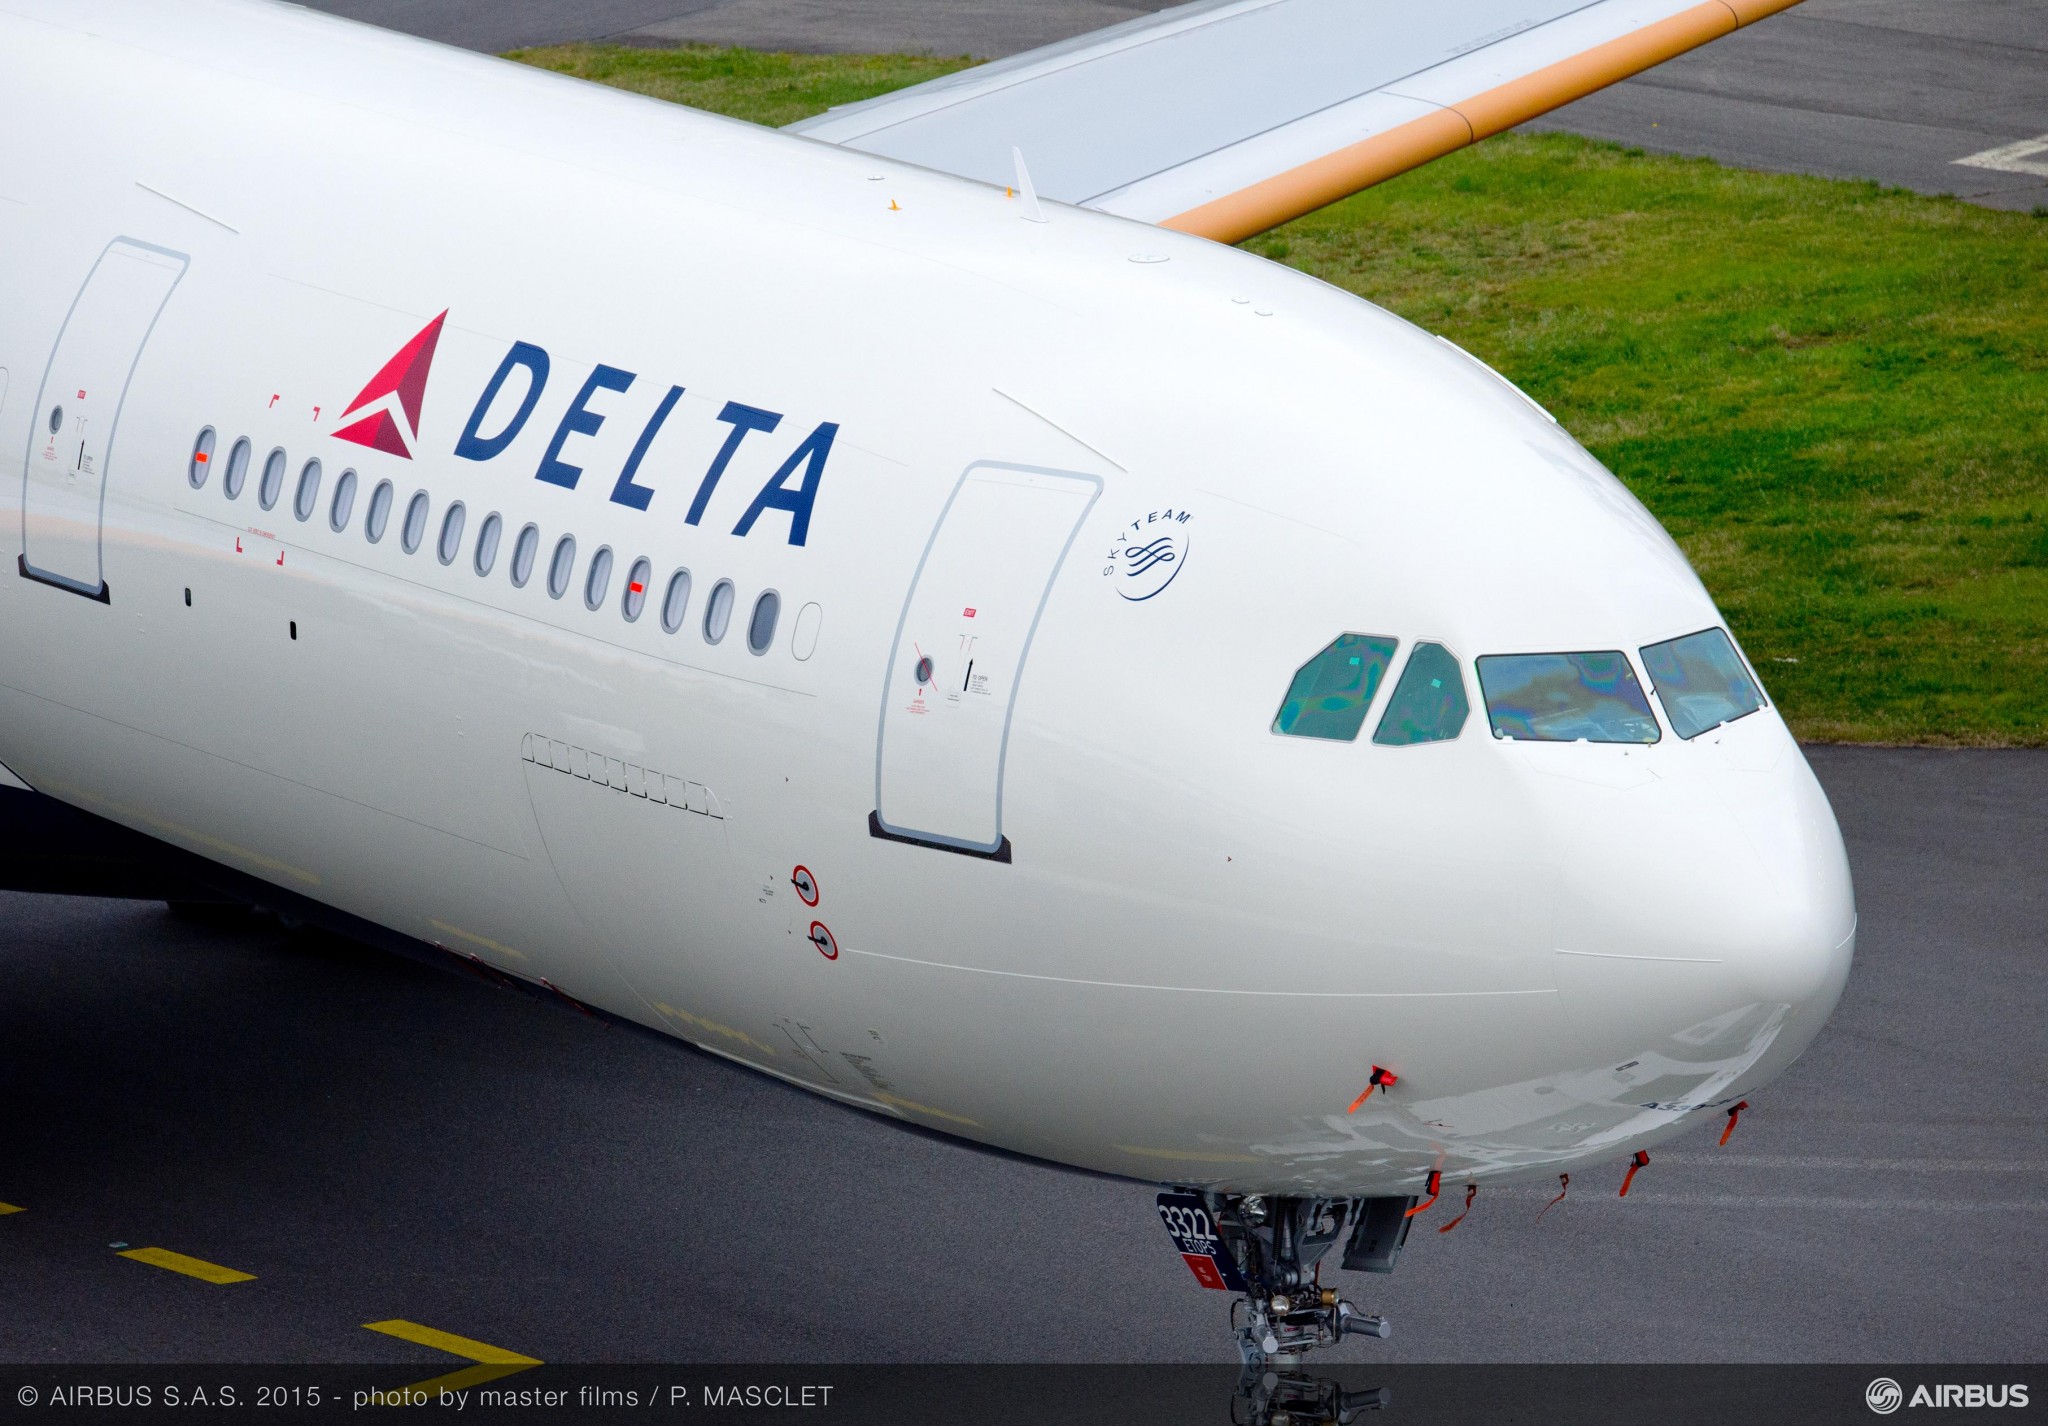 Delta Airlines acquires 4.3% stake in Korean Air’s largest shareholder